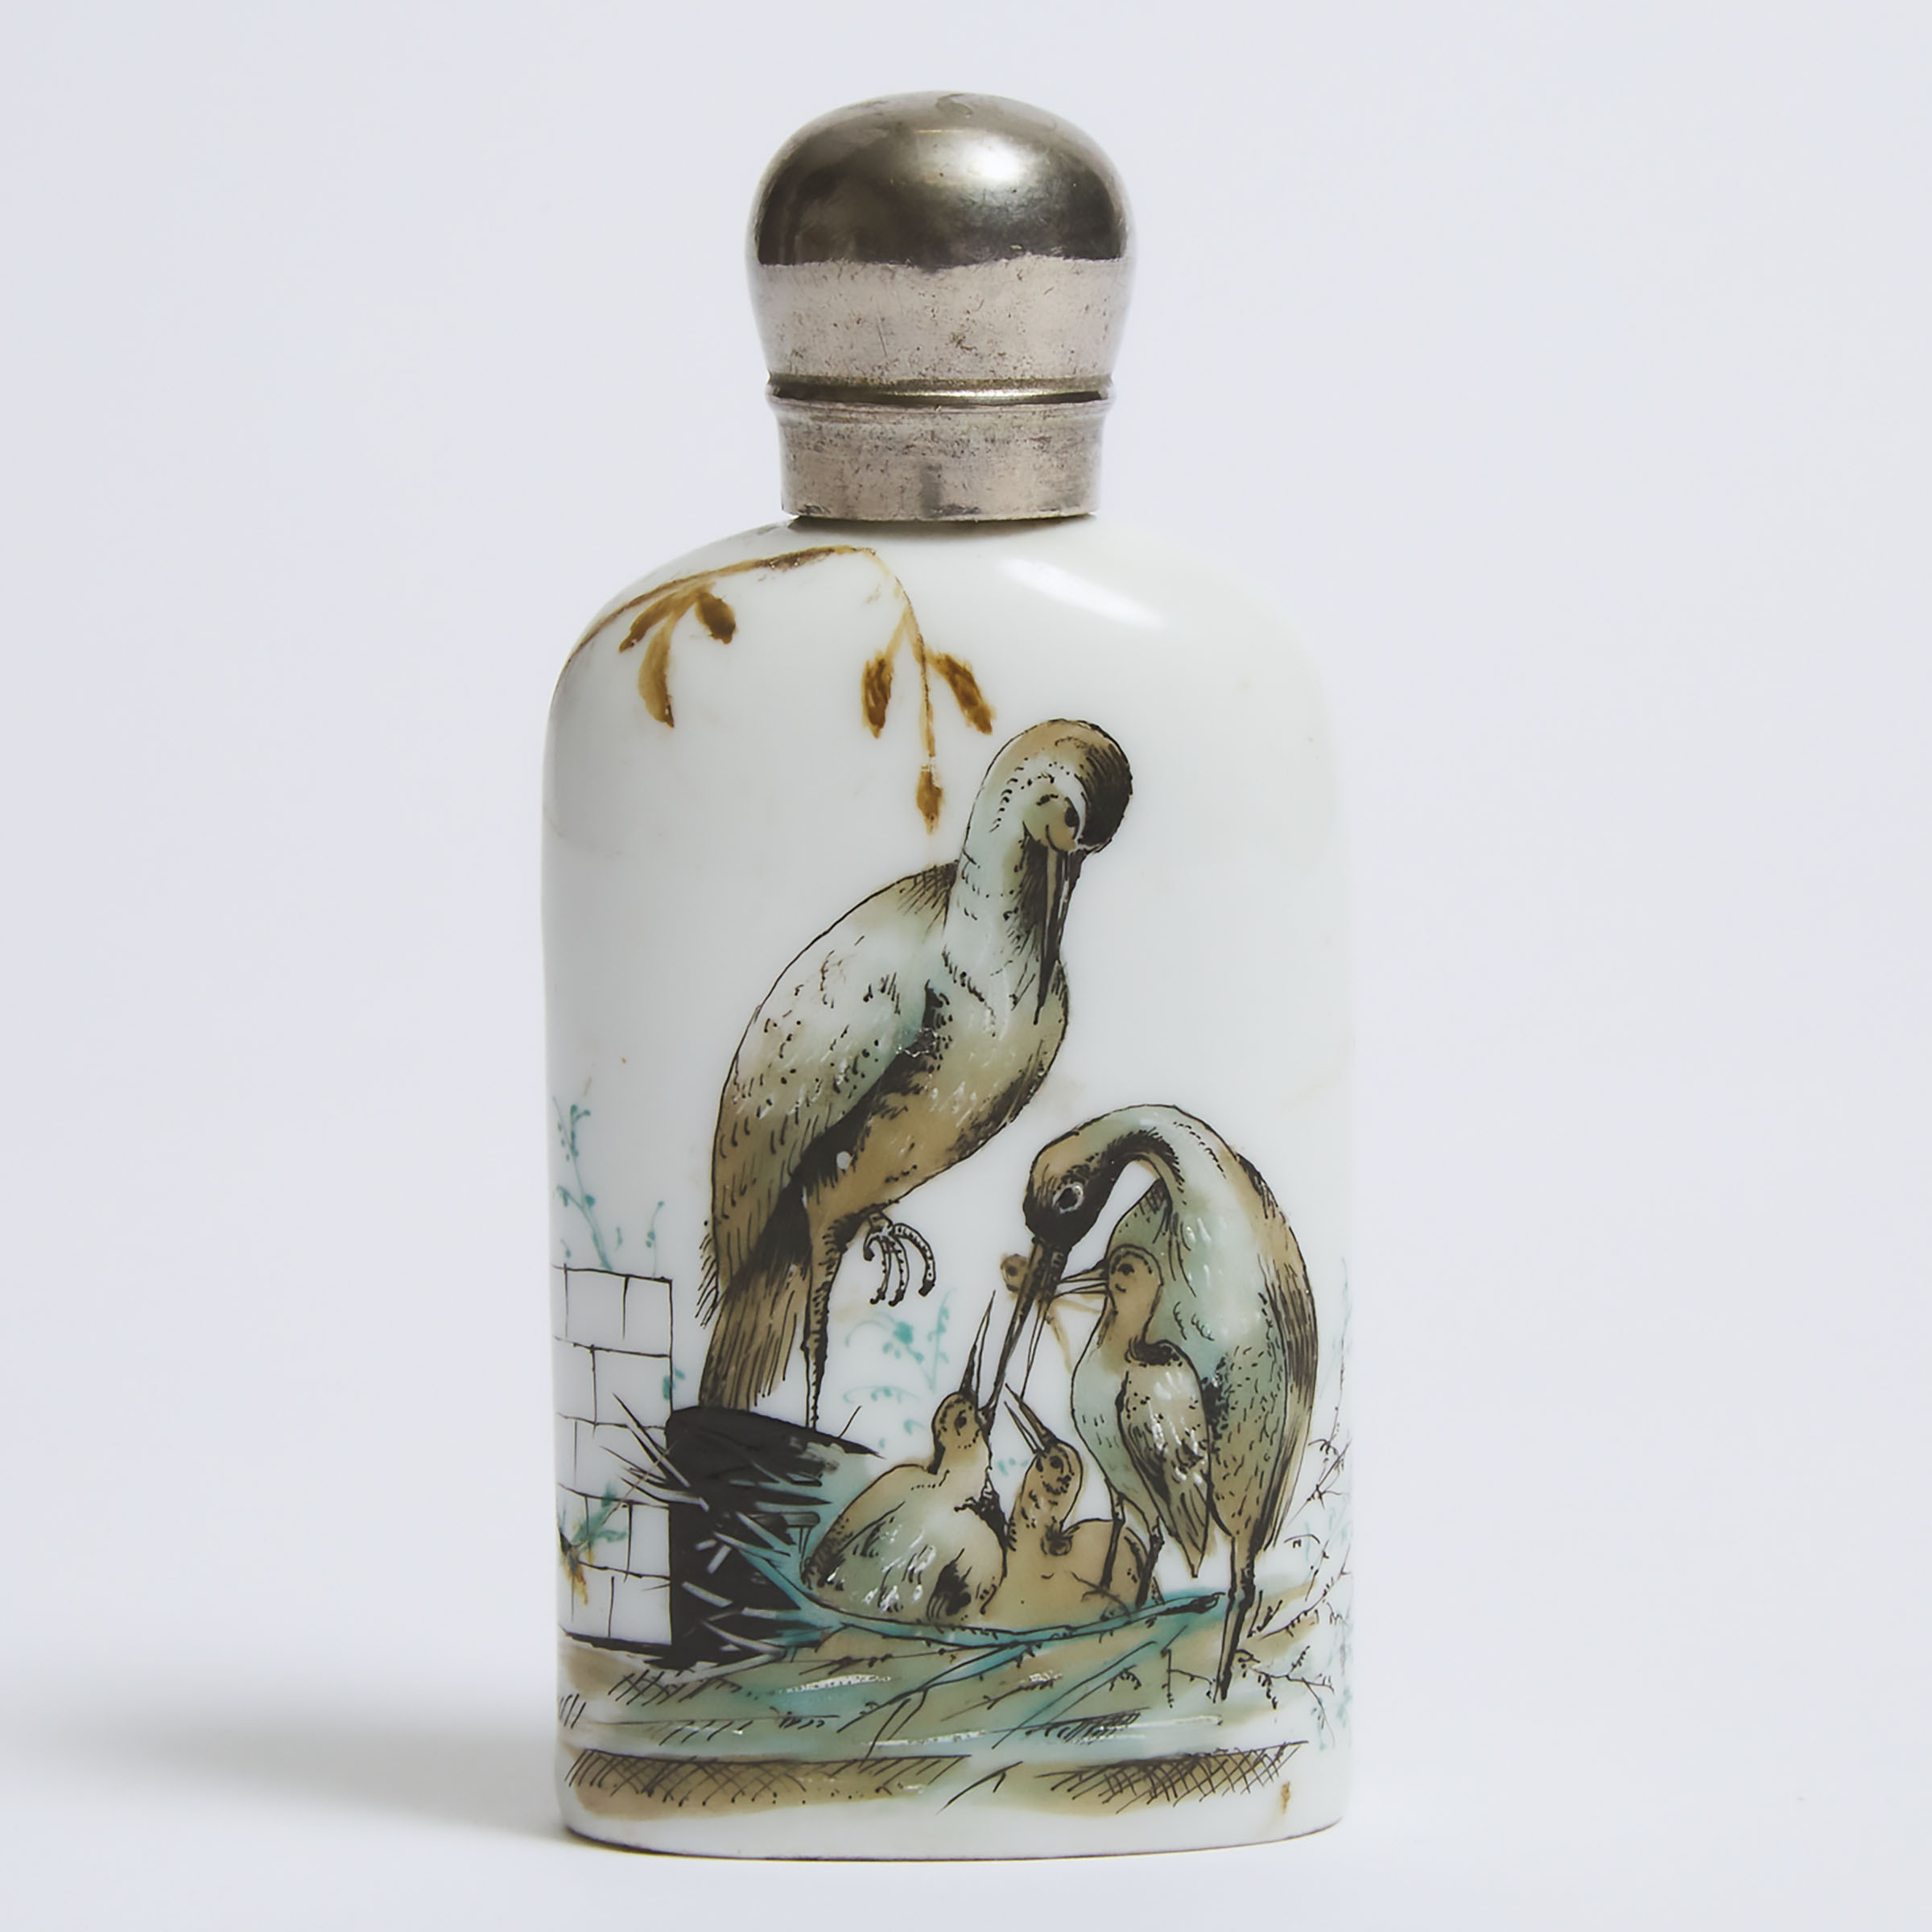 Continental Porcelain Scent Bottle, late 19th century